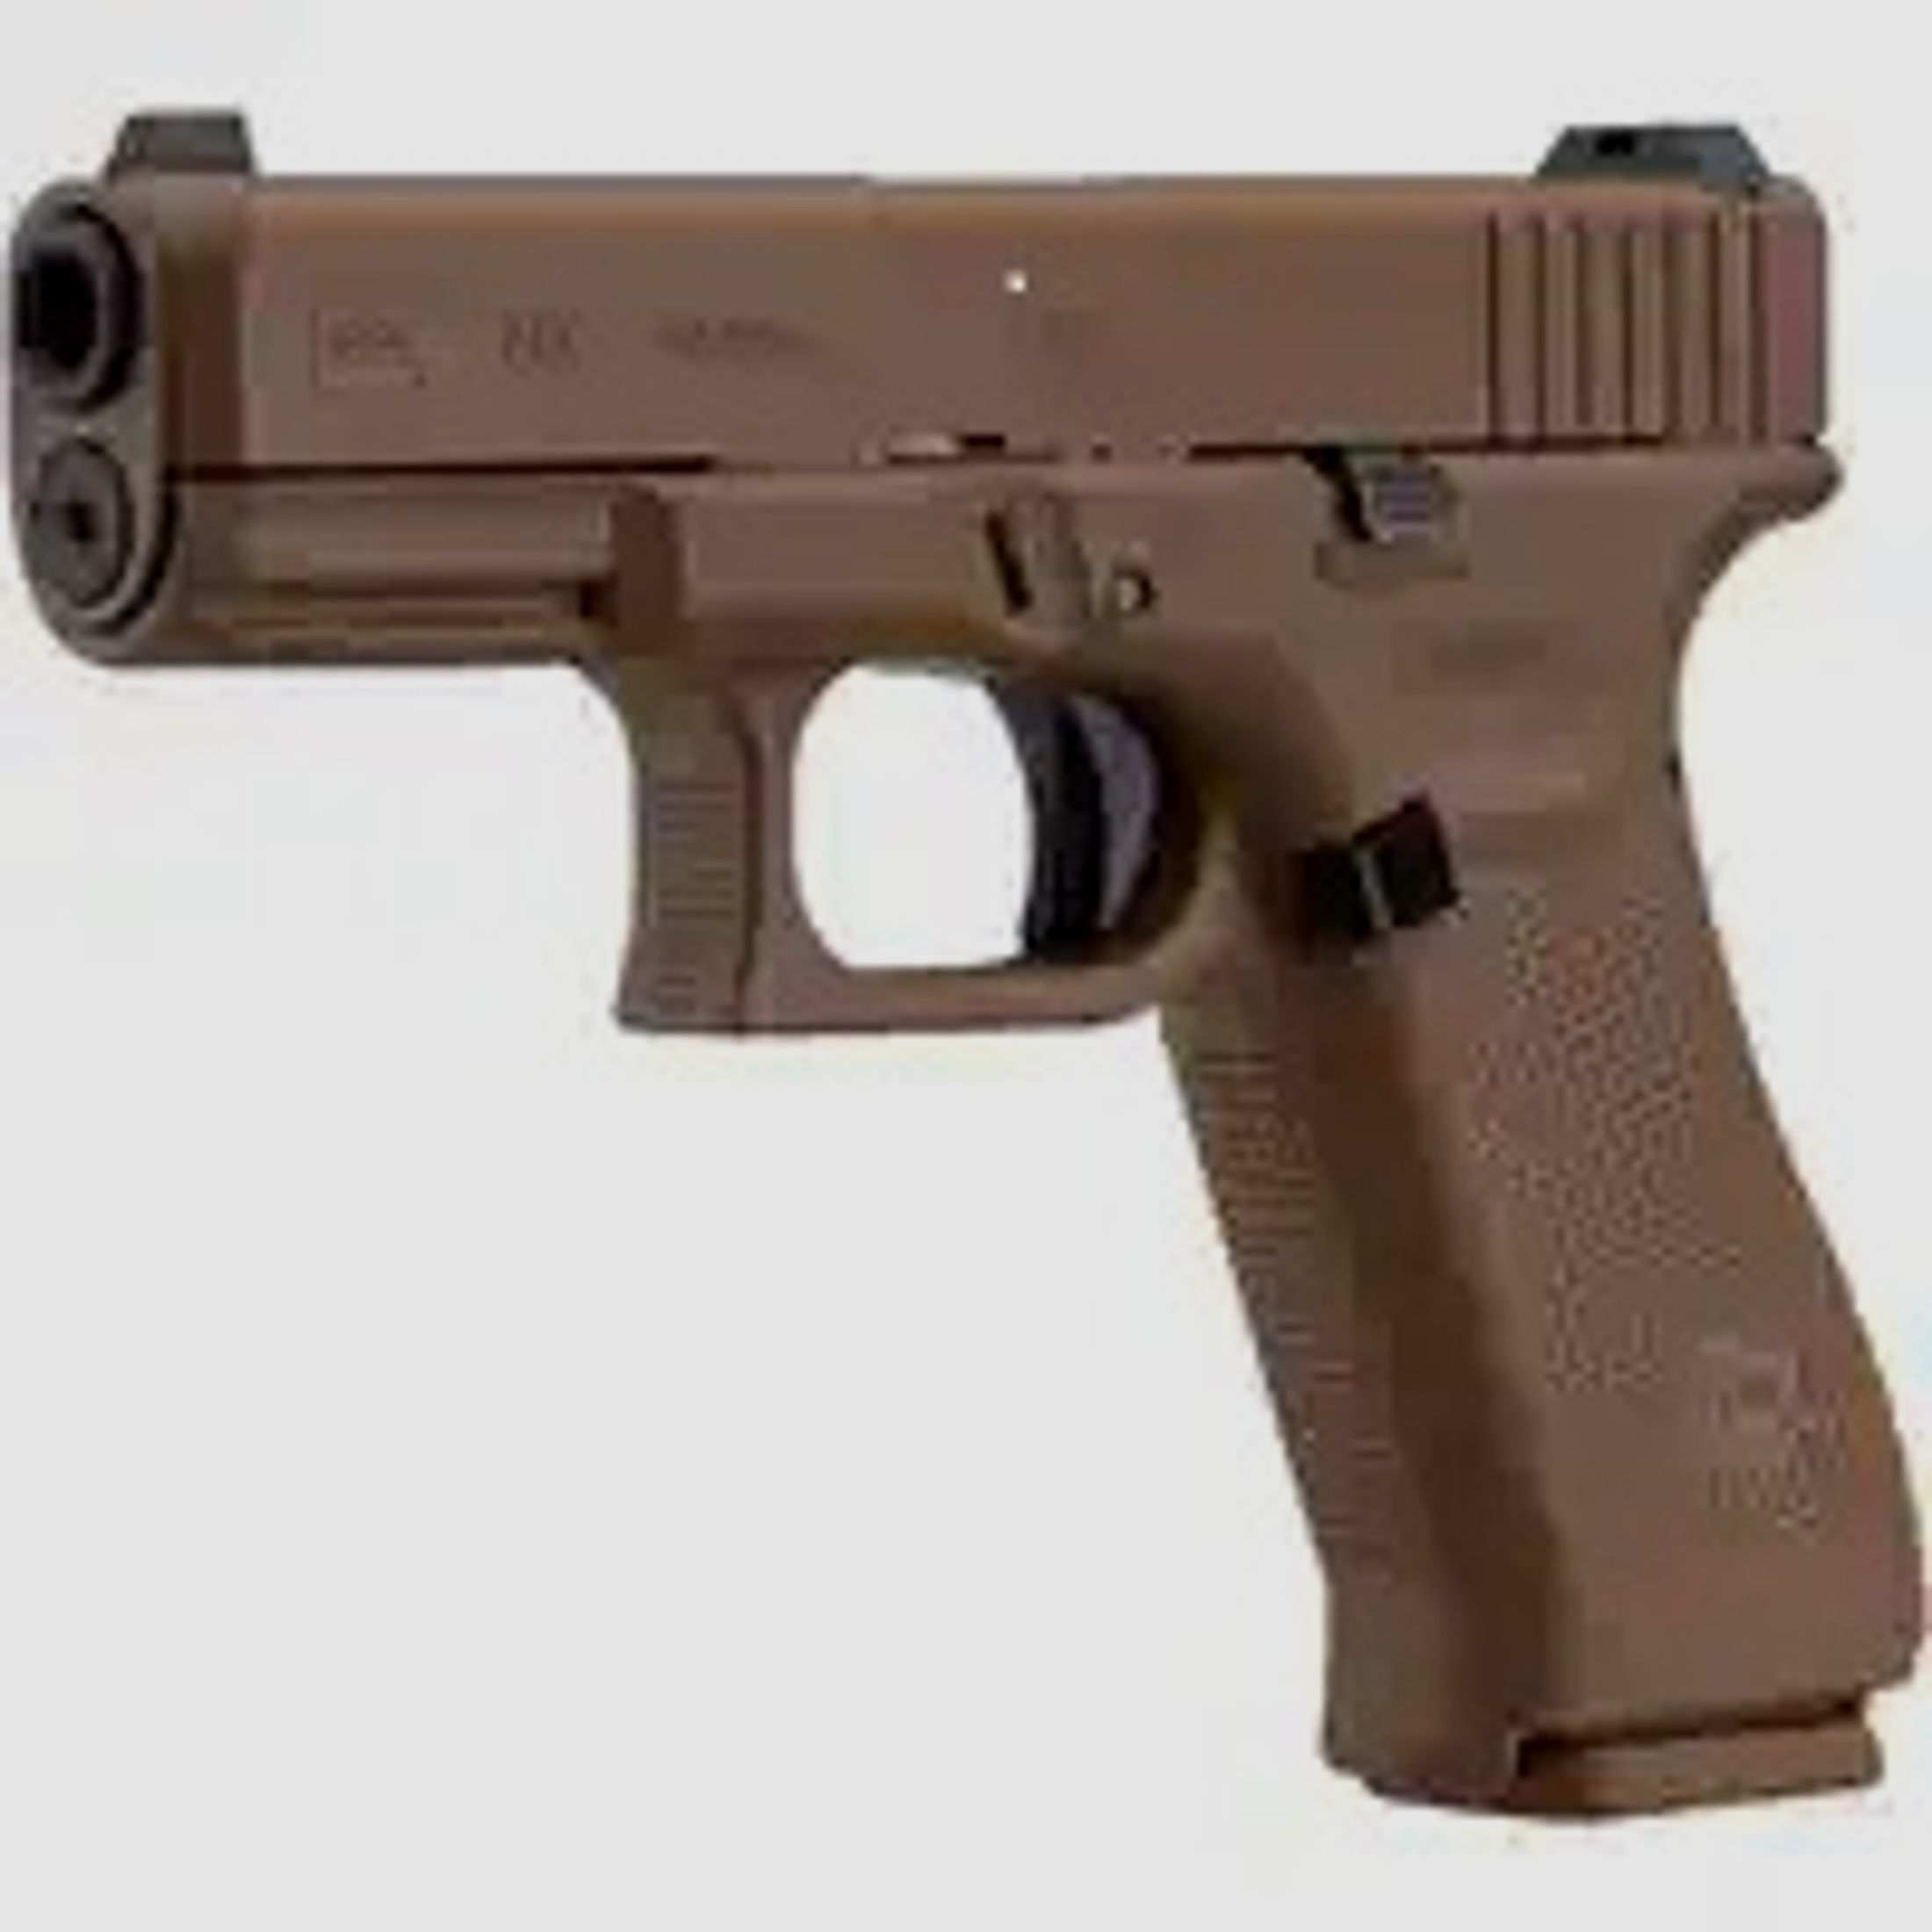 GH Pistole Glock 19X COYOTE Kaliber 9mm Luger